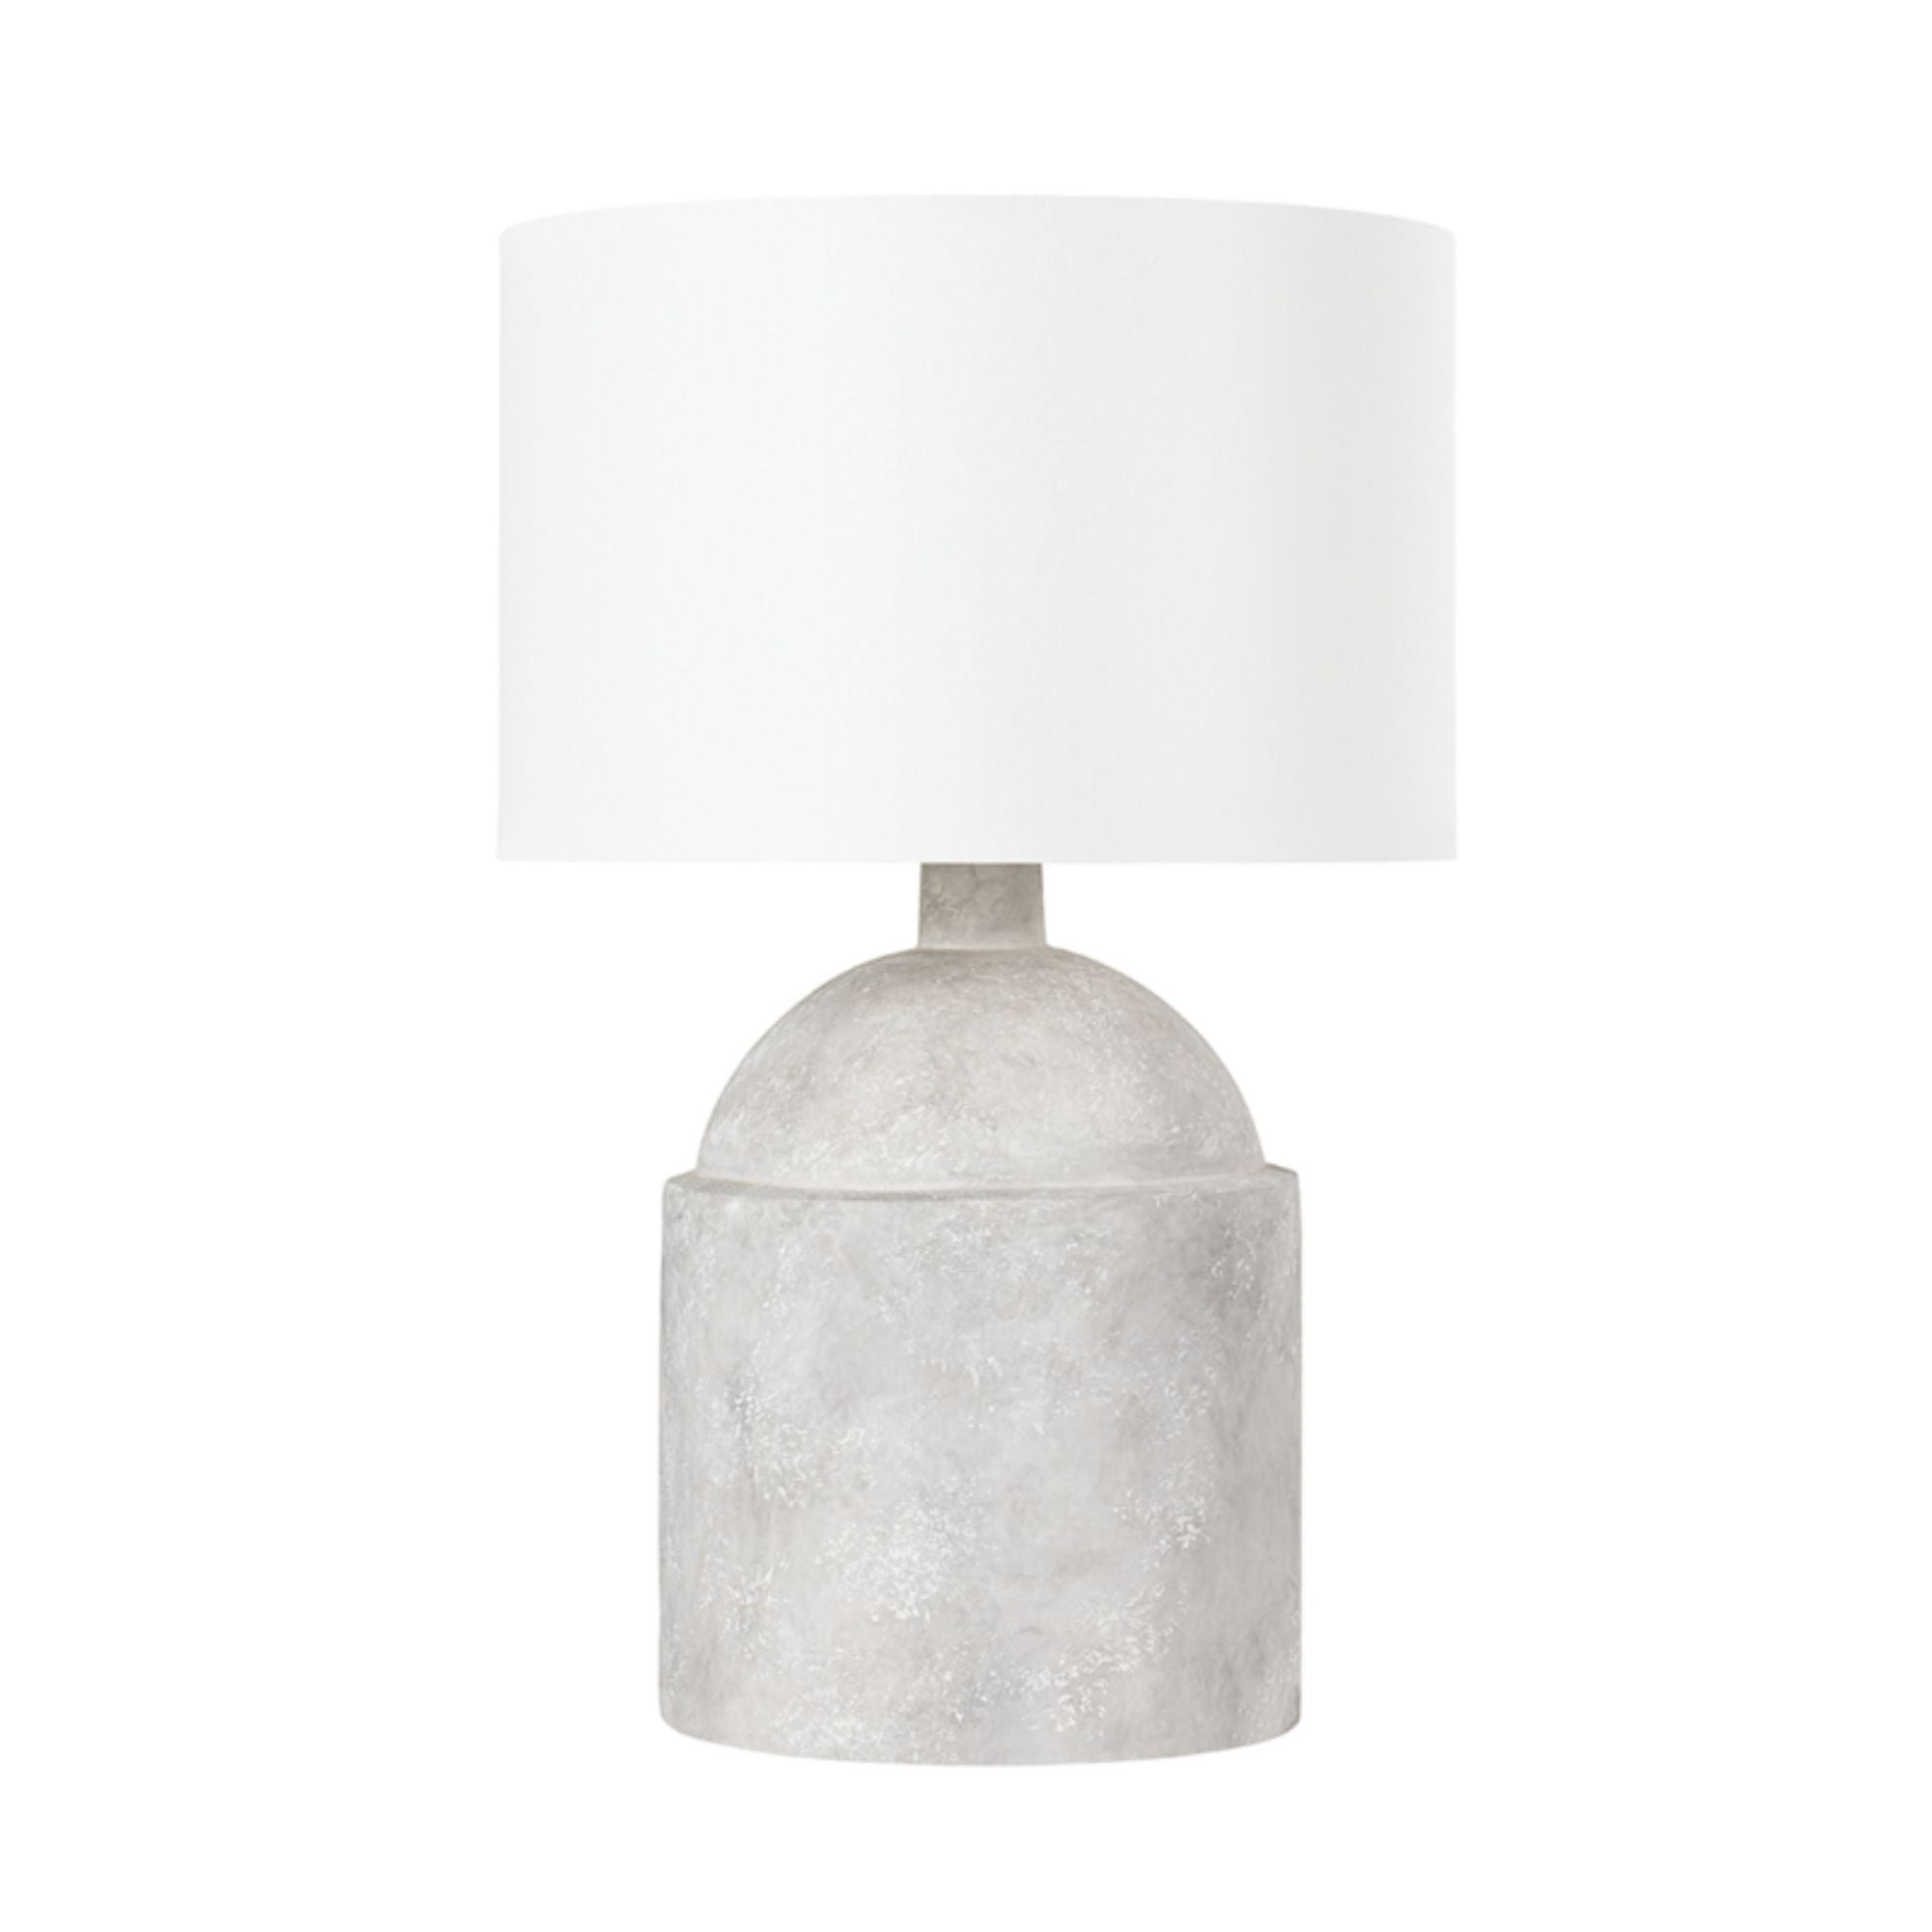 Torrance 1 Light Table Lamp in Ceramic Weathered Grey